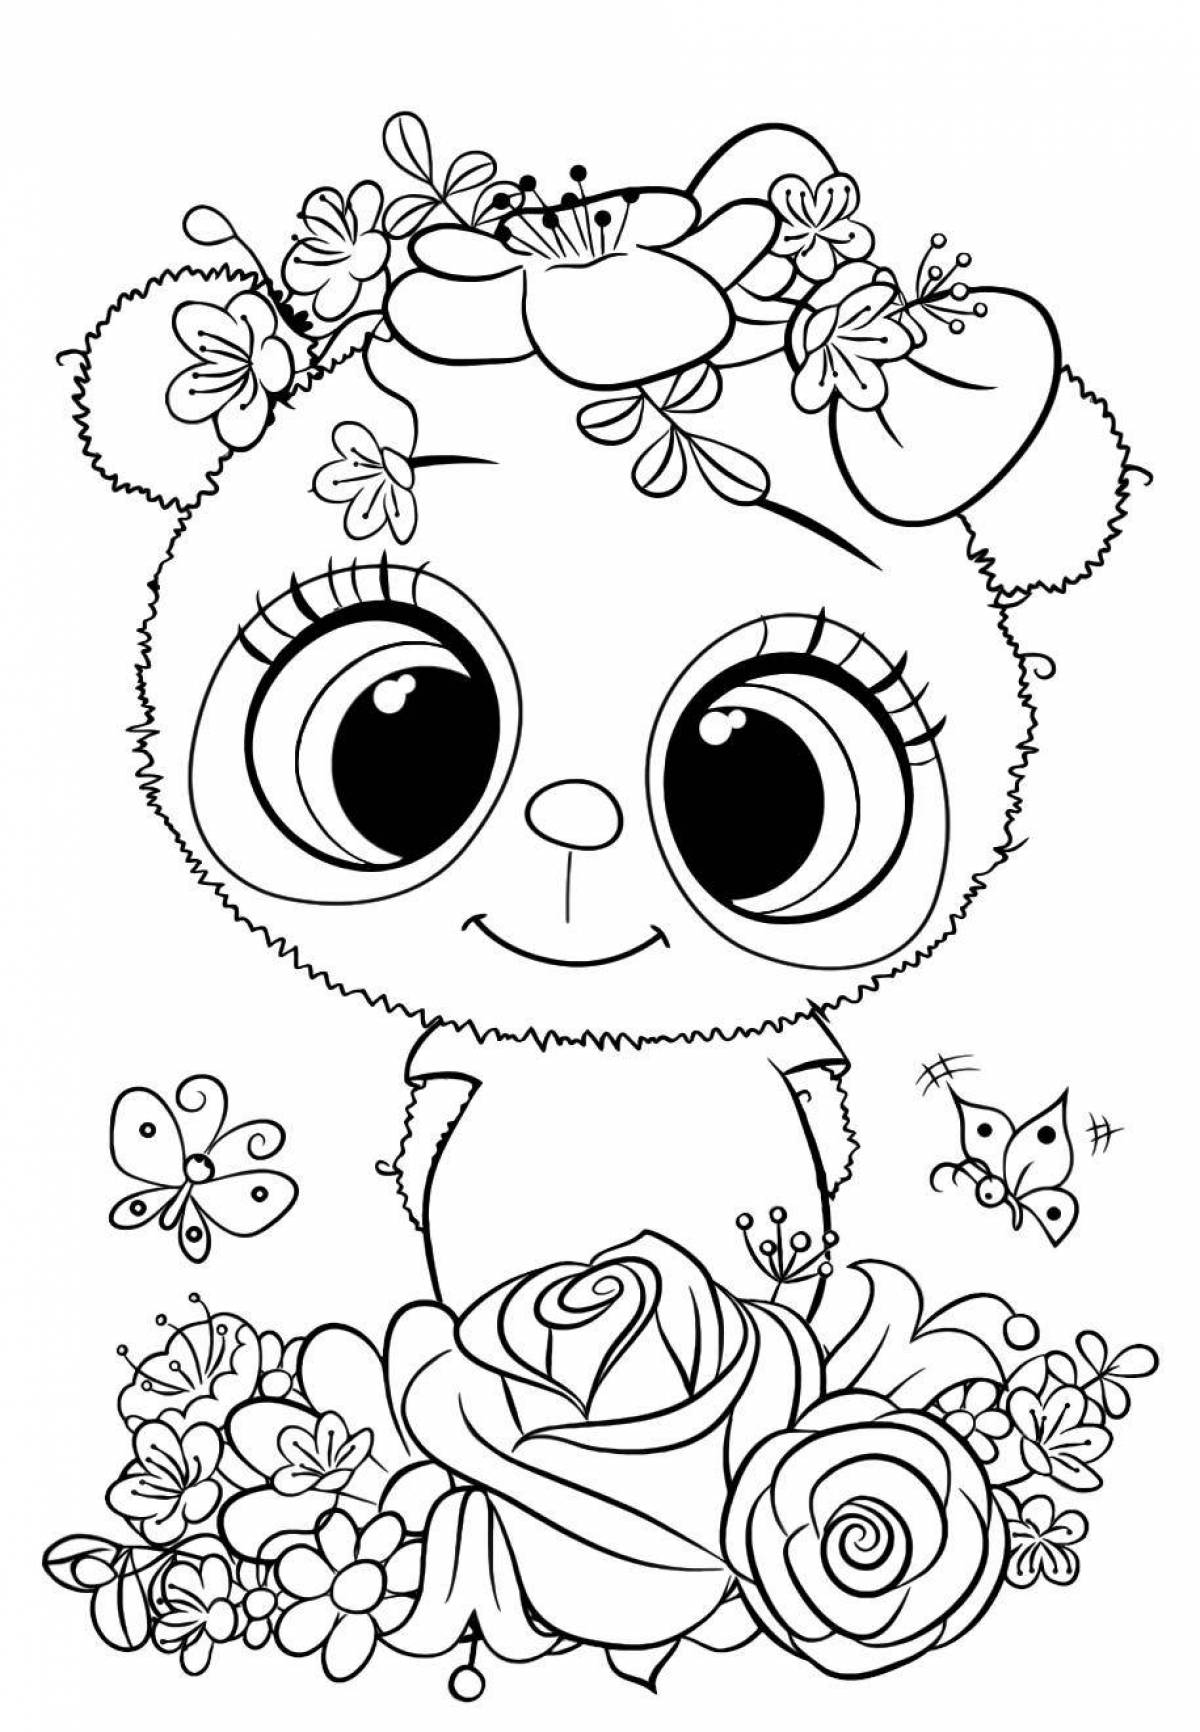 Outstanding cute animal coloring book for girls